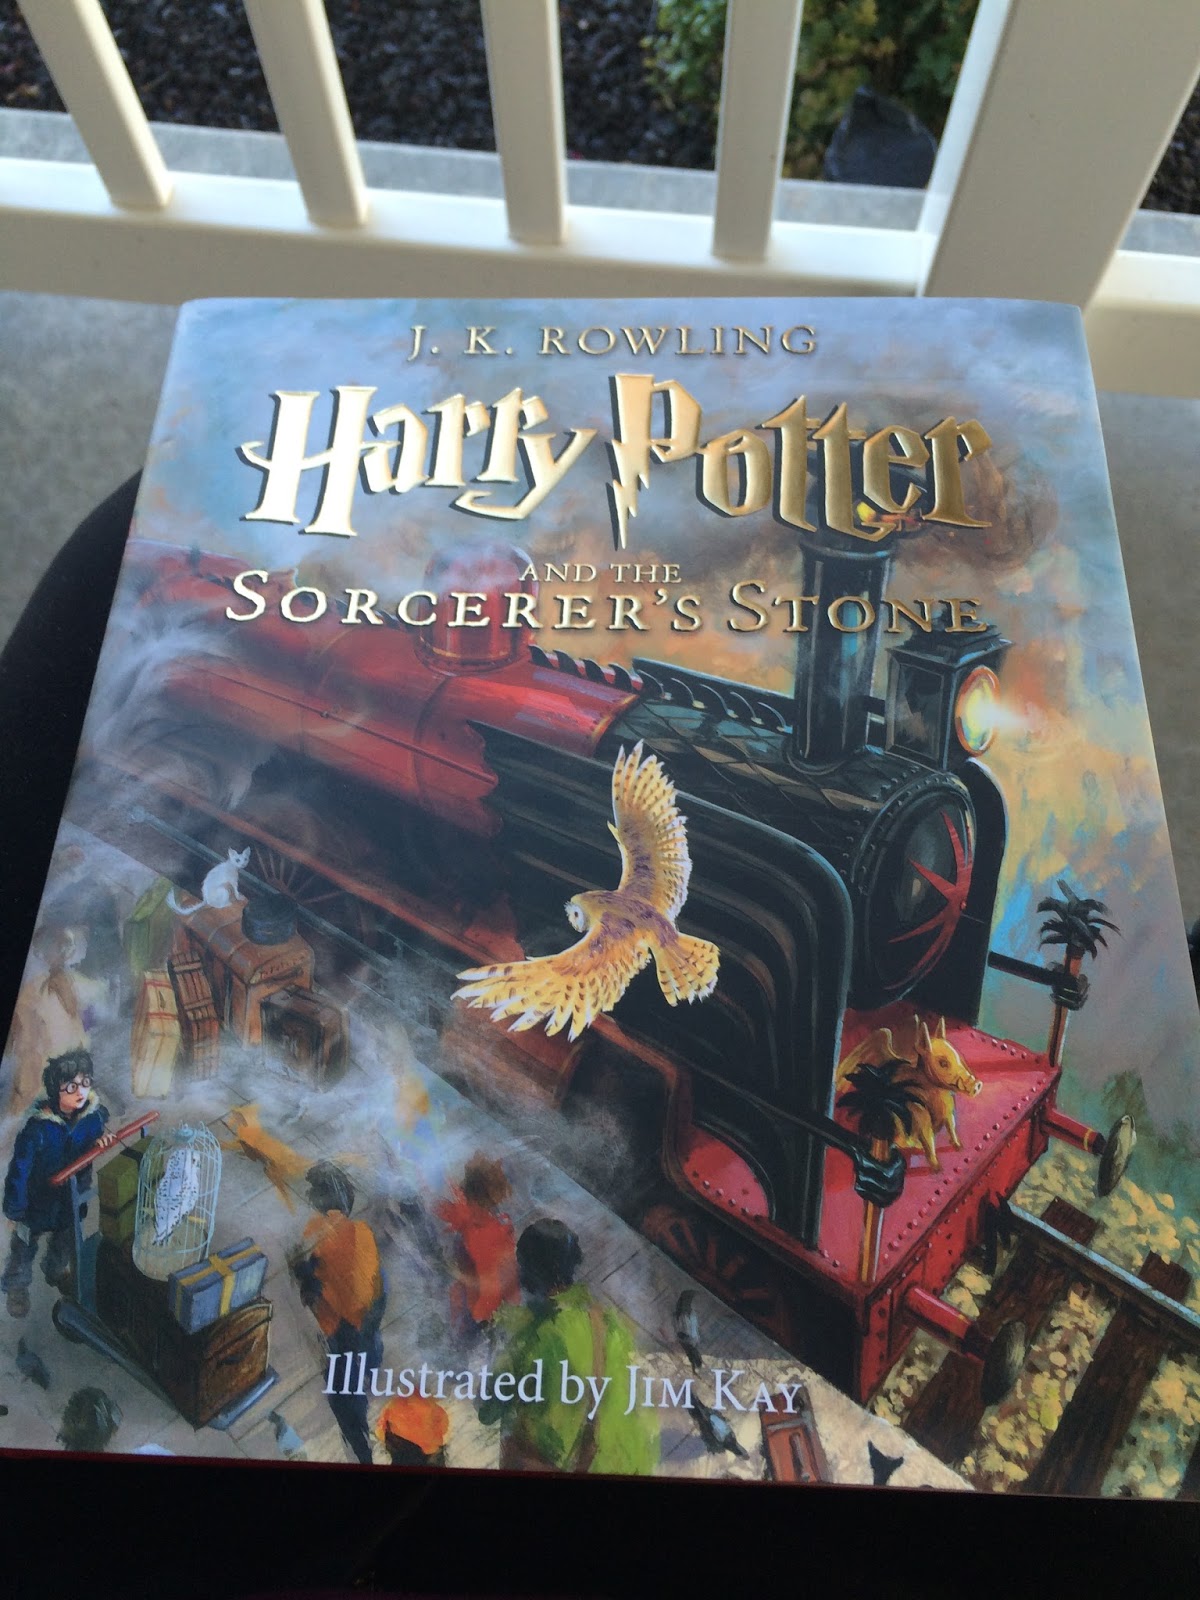 harry potter illustrated book review